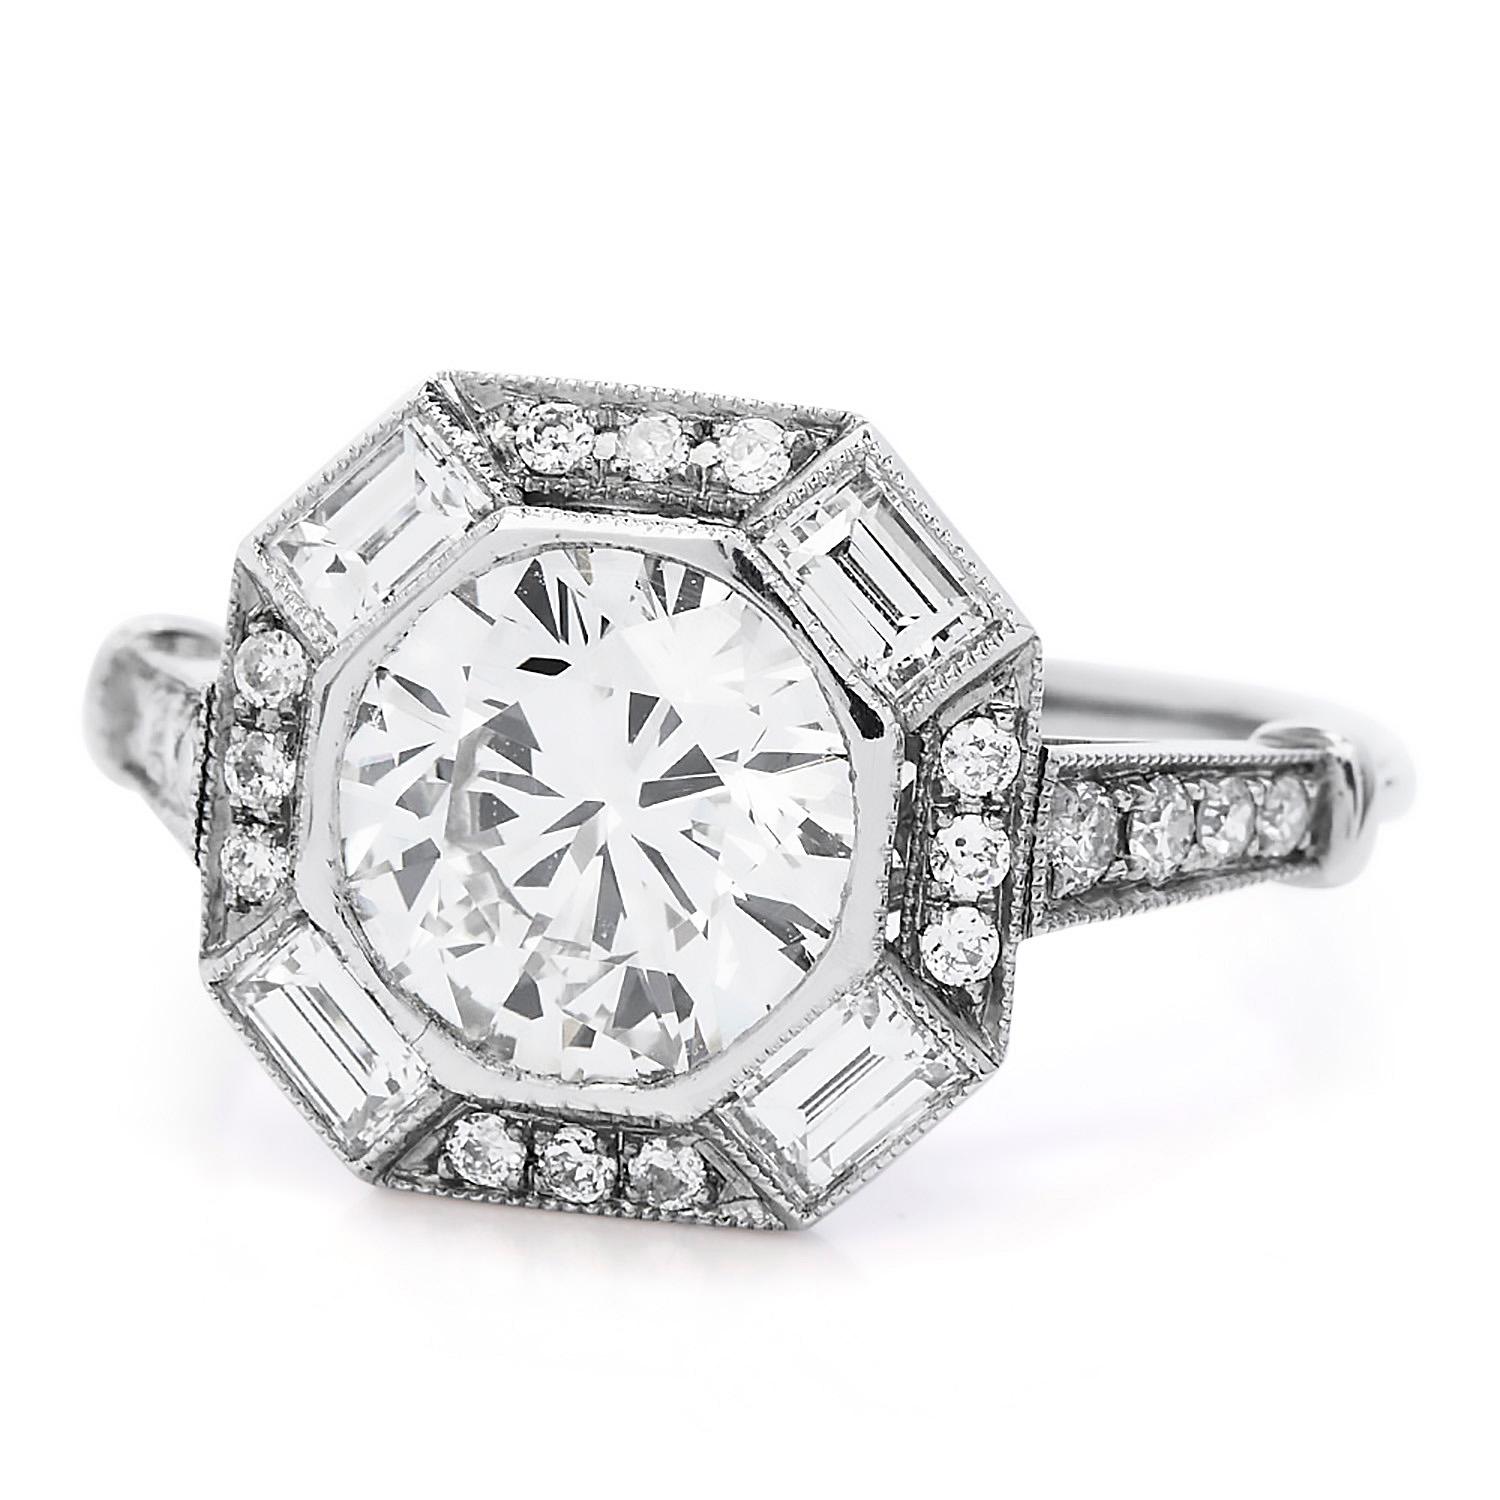 A Geometric octagonal top, a classic Art Deco design, 

This mounting is made by the Designer Sophia D, in luxurious platinum.

Centered by a genuine Diamond of approx. 1.88 carat,  G-H Color & Clarity. this exquisite center stone is surrounded by a